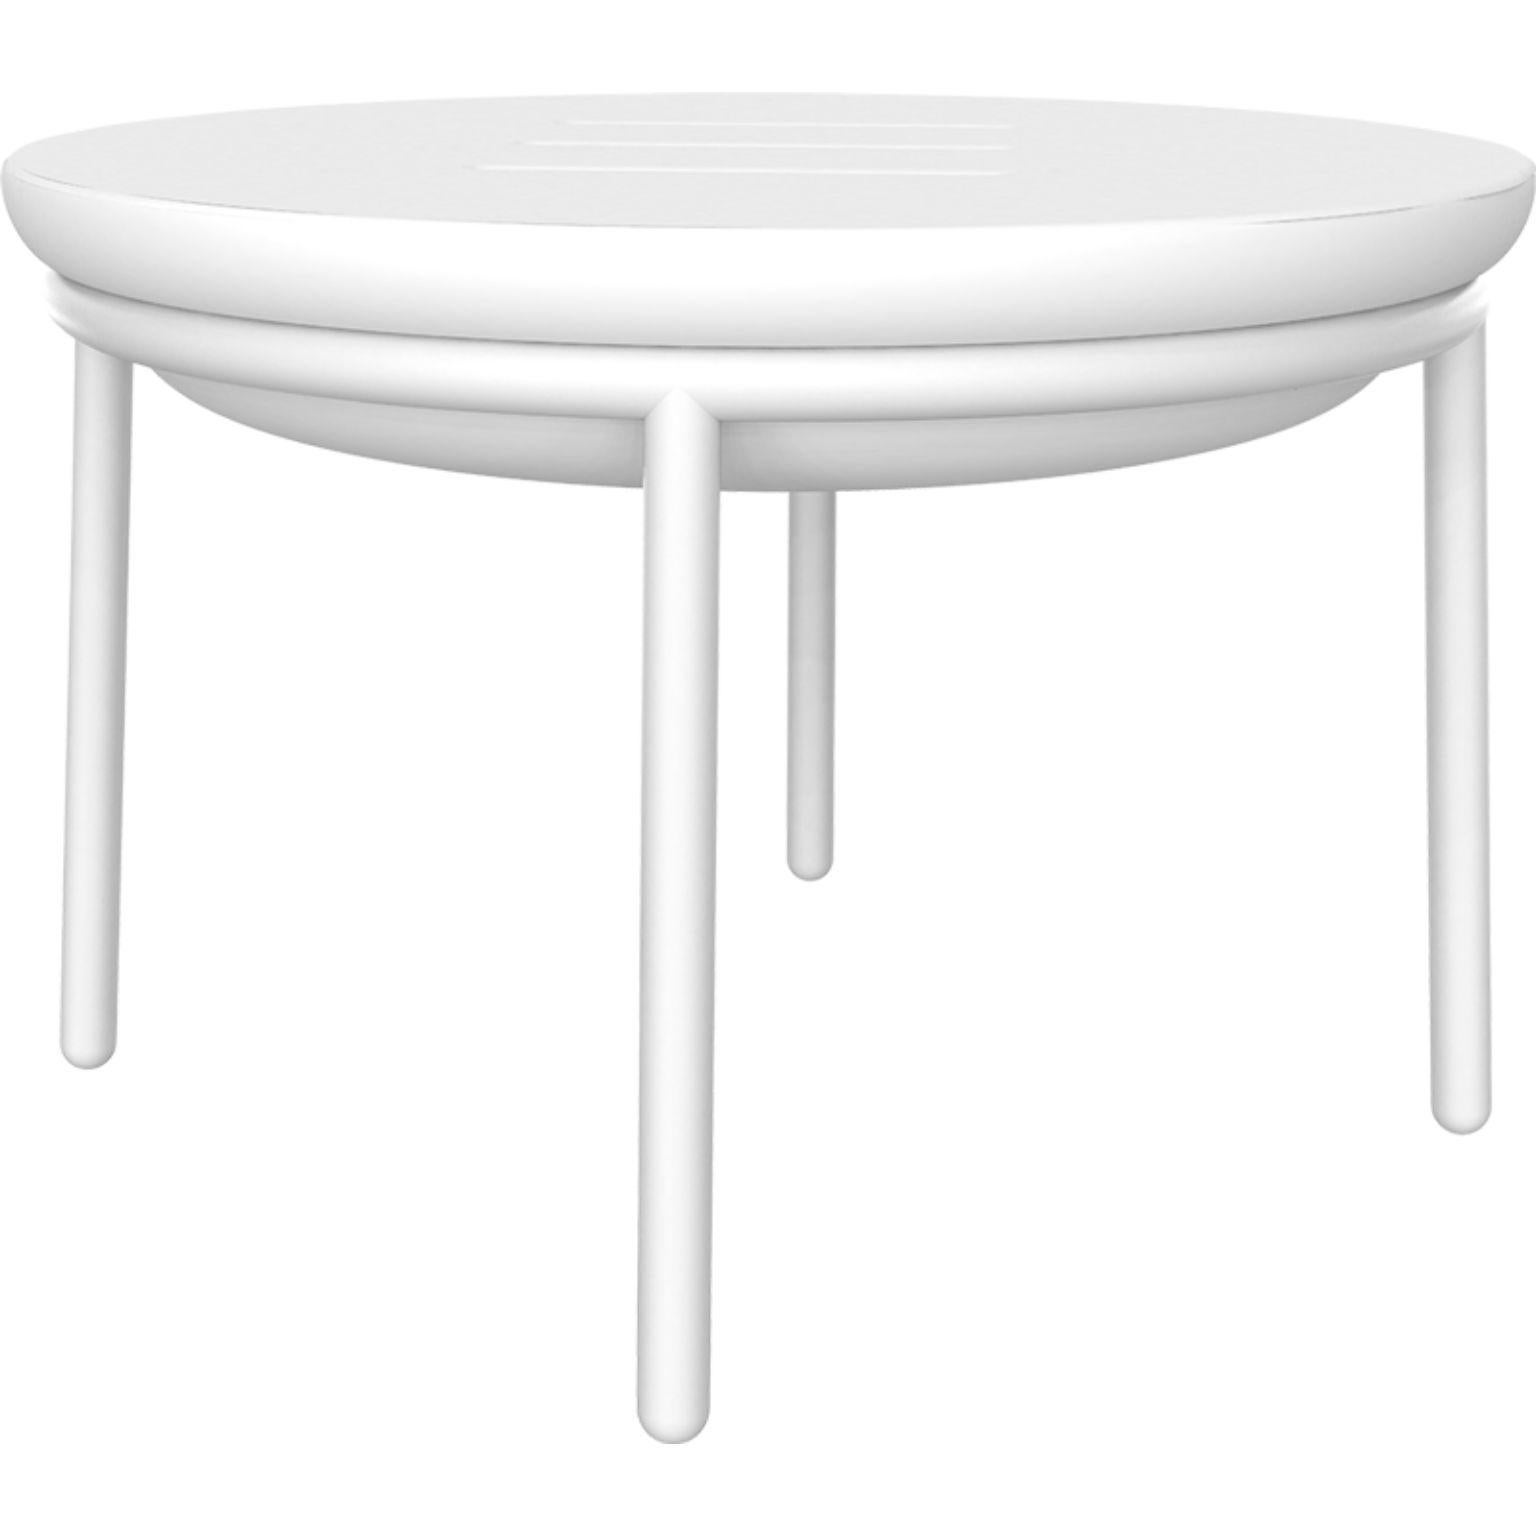 Lace white 60 low table by MOWEE
Dimensions: Ø60 x H41 cm
Material: Polyethylene and stainless steel.
Weight: 6.2 kg.
Also available in different colors and finishes (lacquered). 

Lace is a collection of furniture made by rotomoulding. Its